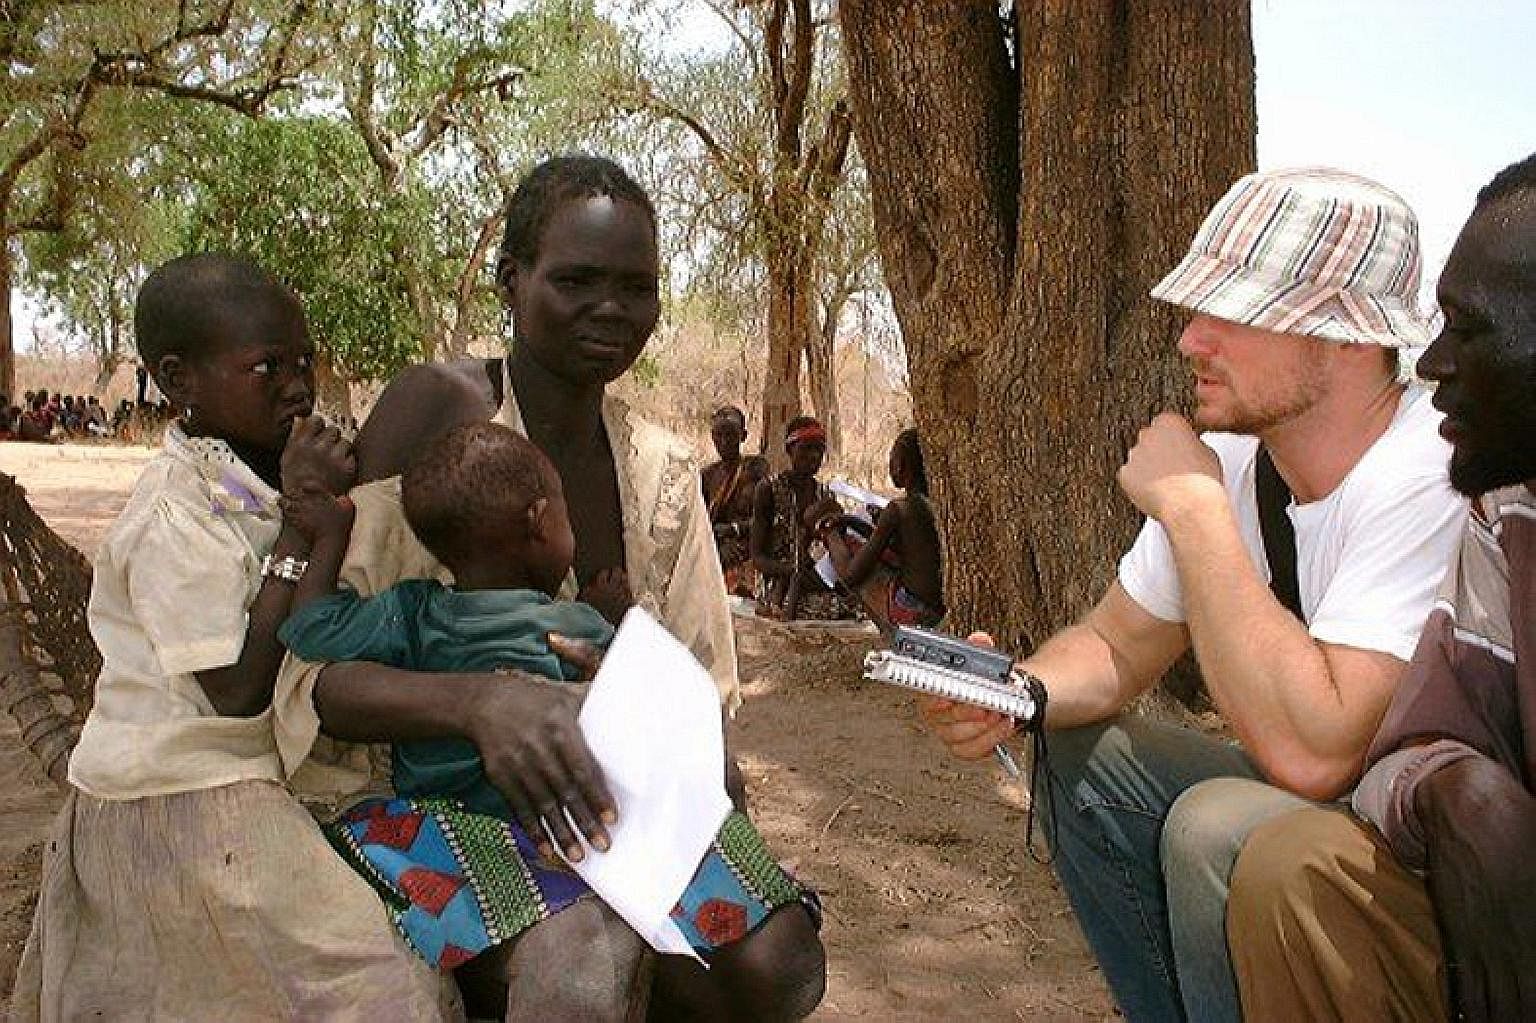 Mr Skinner on assignment in Sudan in 2003. He had persuaded Newsweek to let him fly to the front lines of the civil war there where slavery and human trafficking were booming. In Haiti, a man - just one of many traffickers who procure children from i